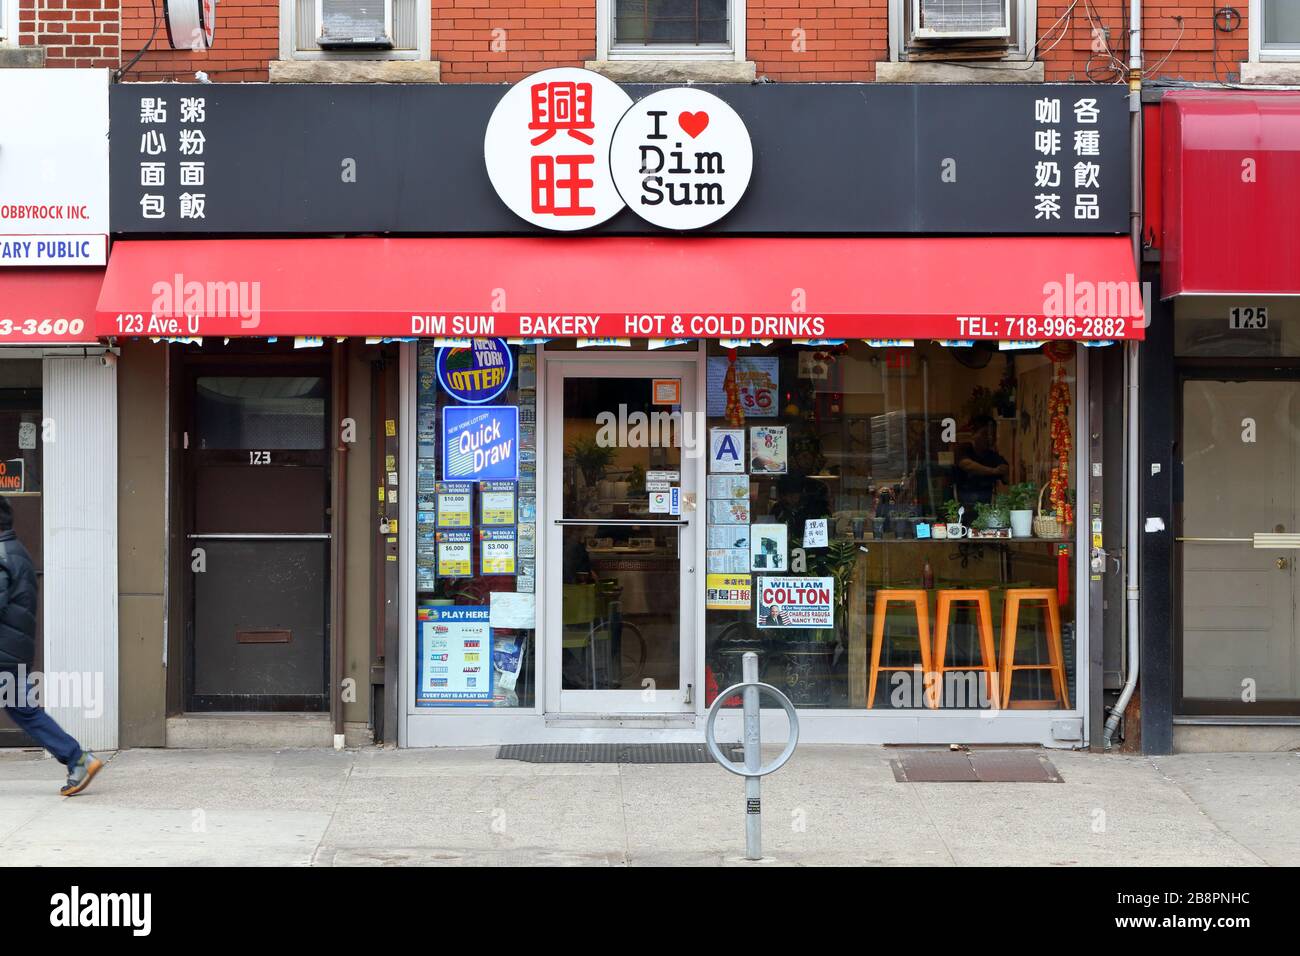 I Love DimSum, 123 Avenue U, Brooklyn, NY. exterior storefront of a Chinese dim sum bakery, and cafe. Stock Photo